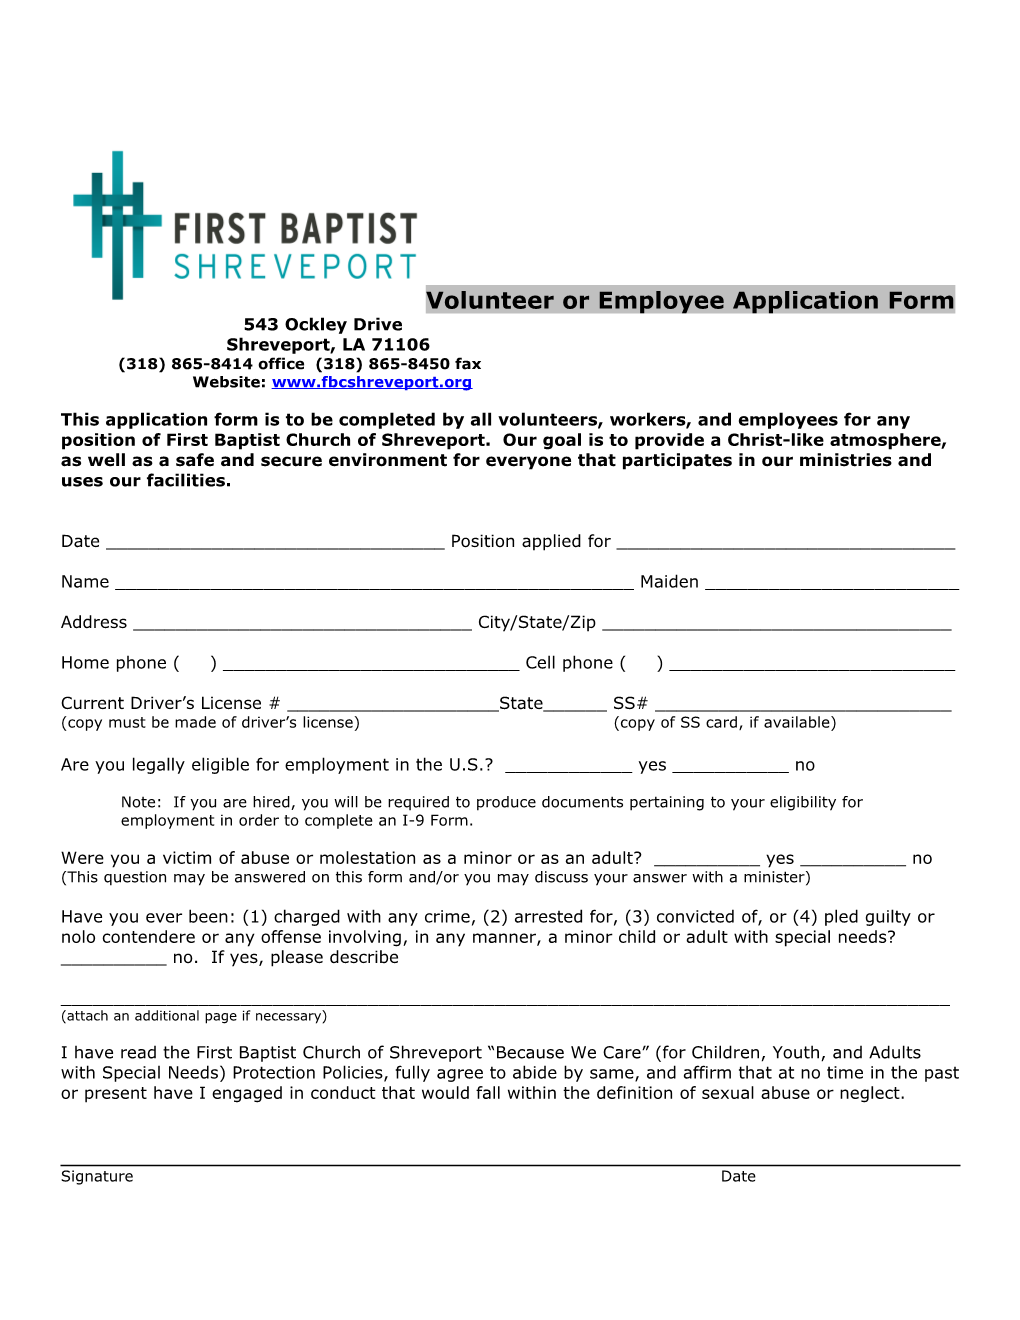 This Application Form Is to Be Completed by All Volunteers, Workers, and Employees For